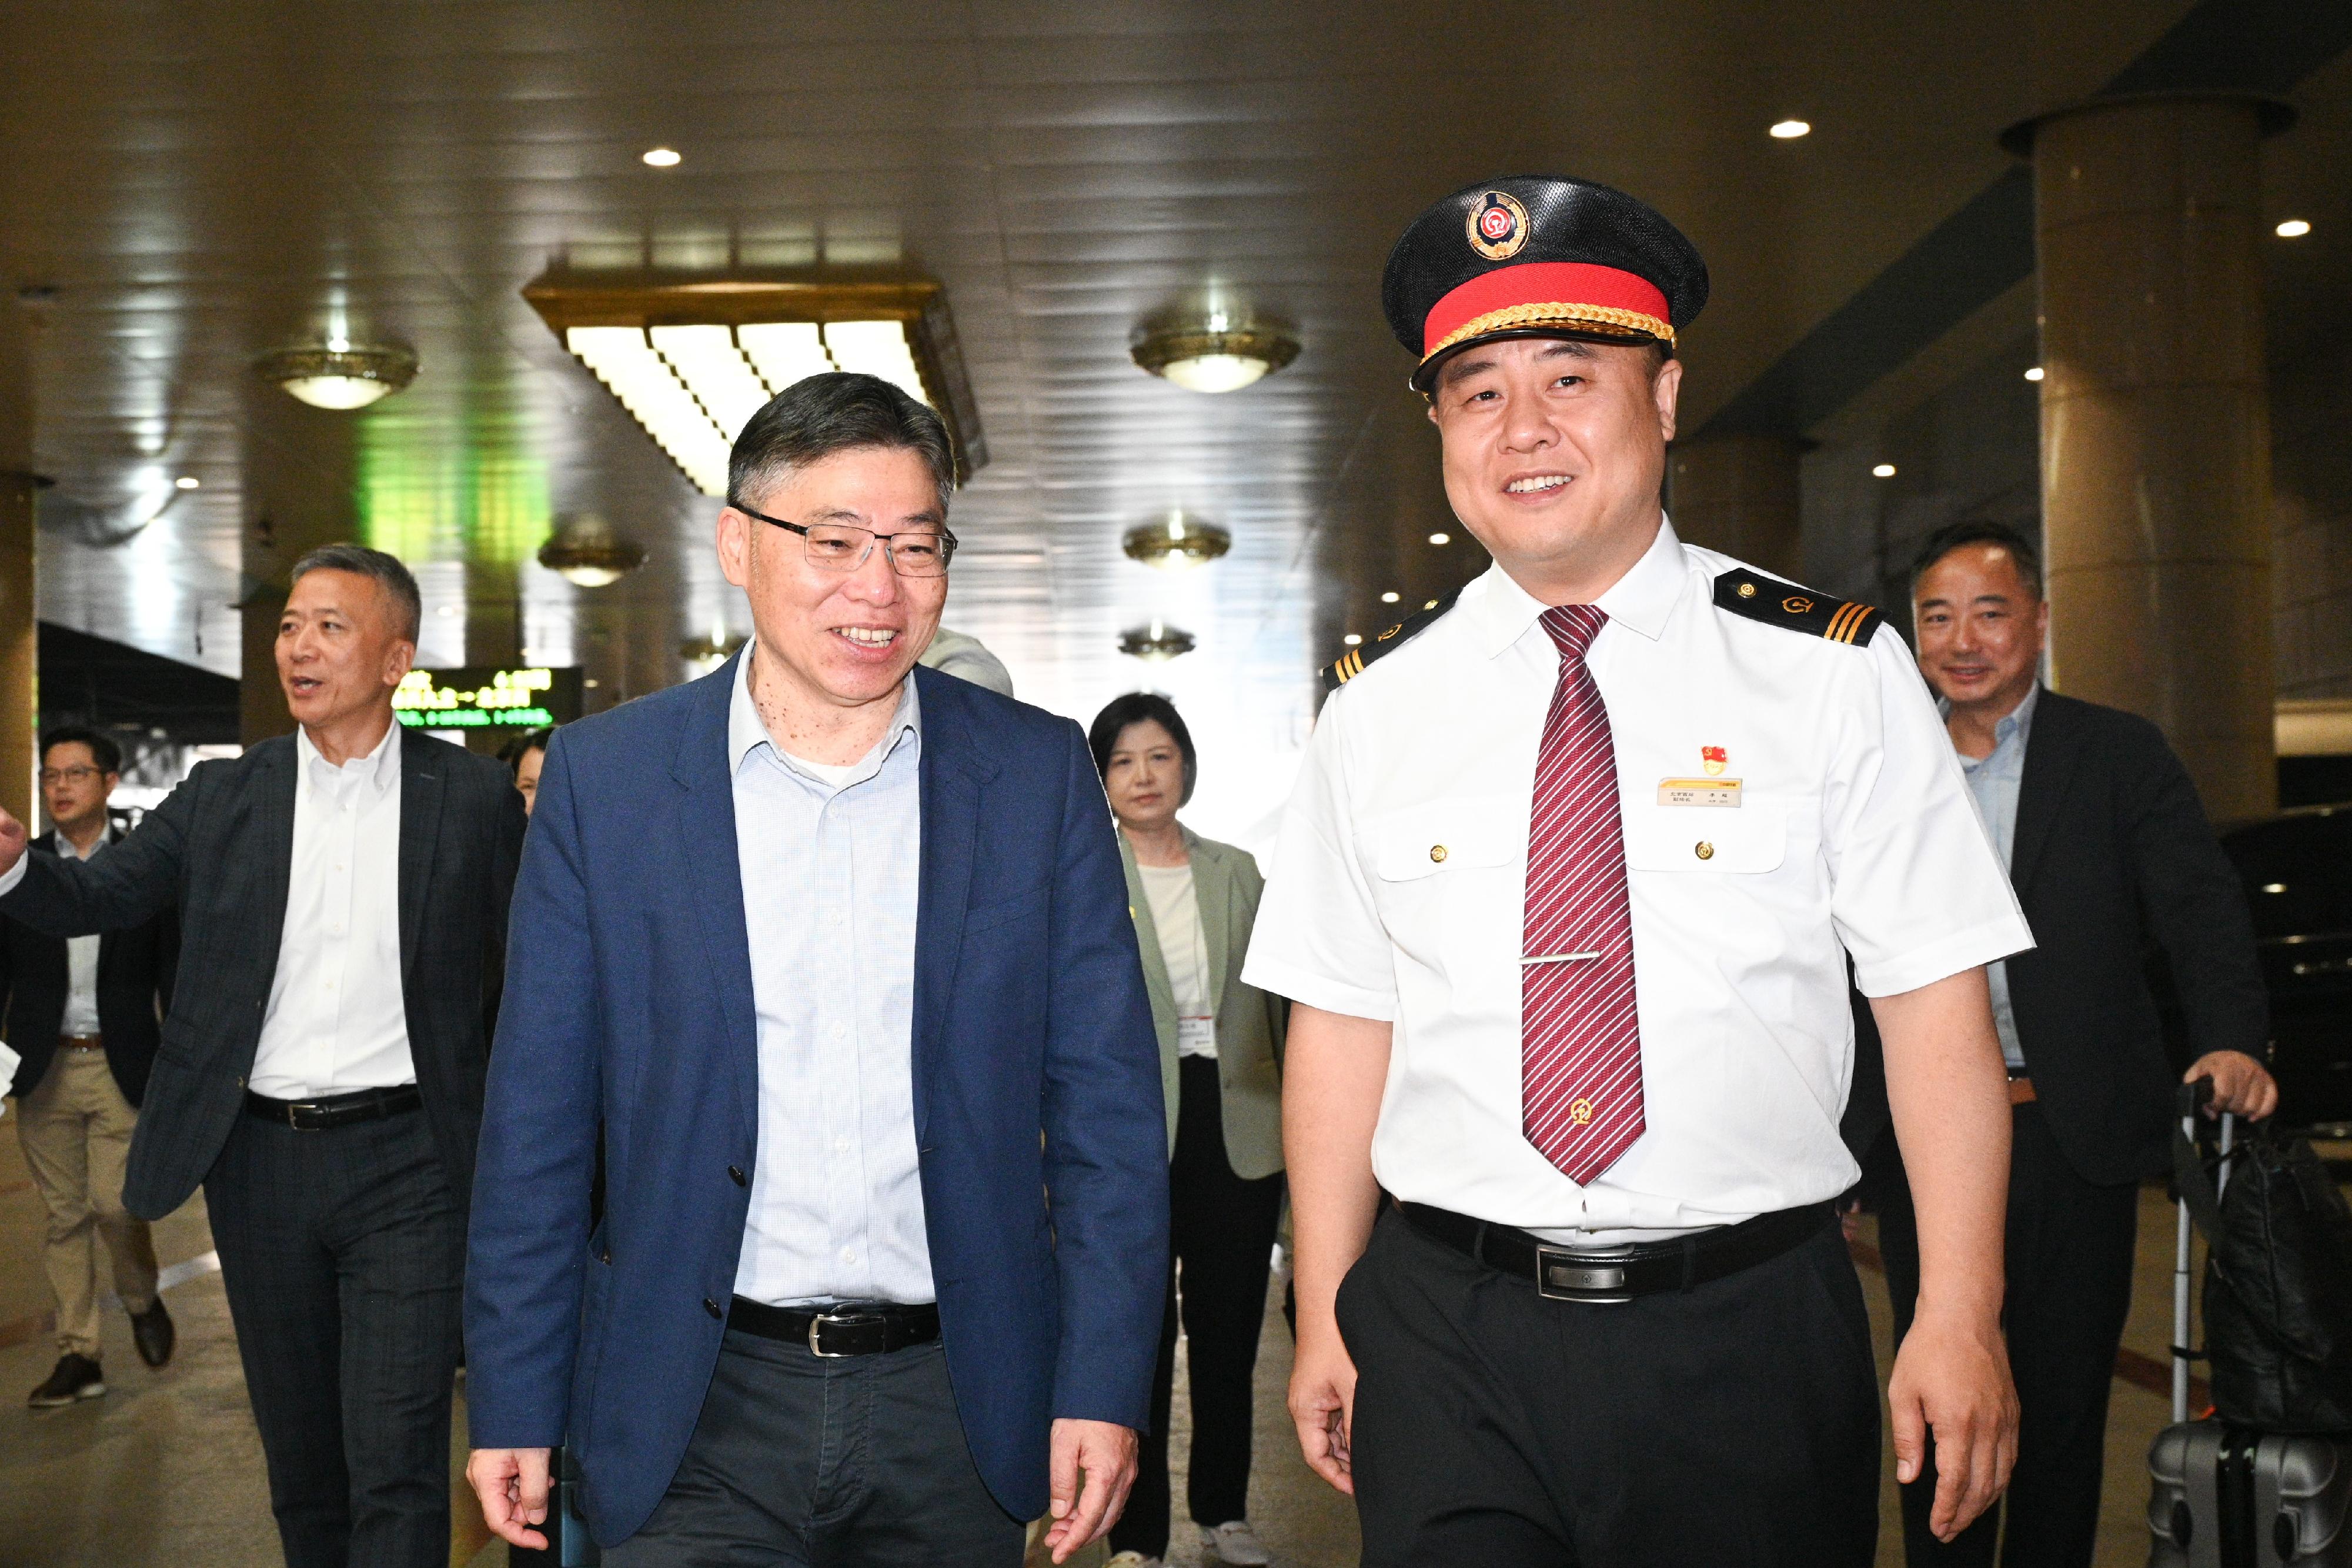 The Secretary for Transport and Logistics, Mr Lam Sai-hung, arrived at the Beijingxi Station this morning (June 16) after taking the inaugural sleeper train of the Guangzhou-Shenzhen-Hong Kong Express Rail Link. Photo shows Mr Lam (left) and an operating staff attending a welcome ceremony for the inaugural sleeper train.   
